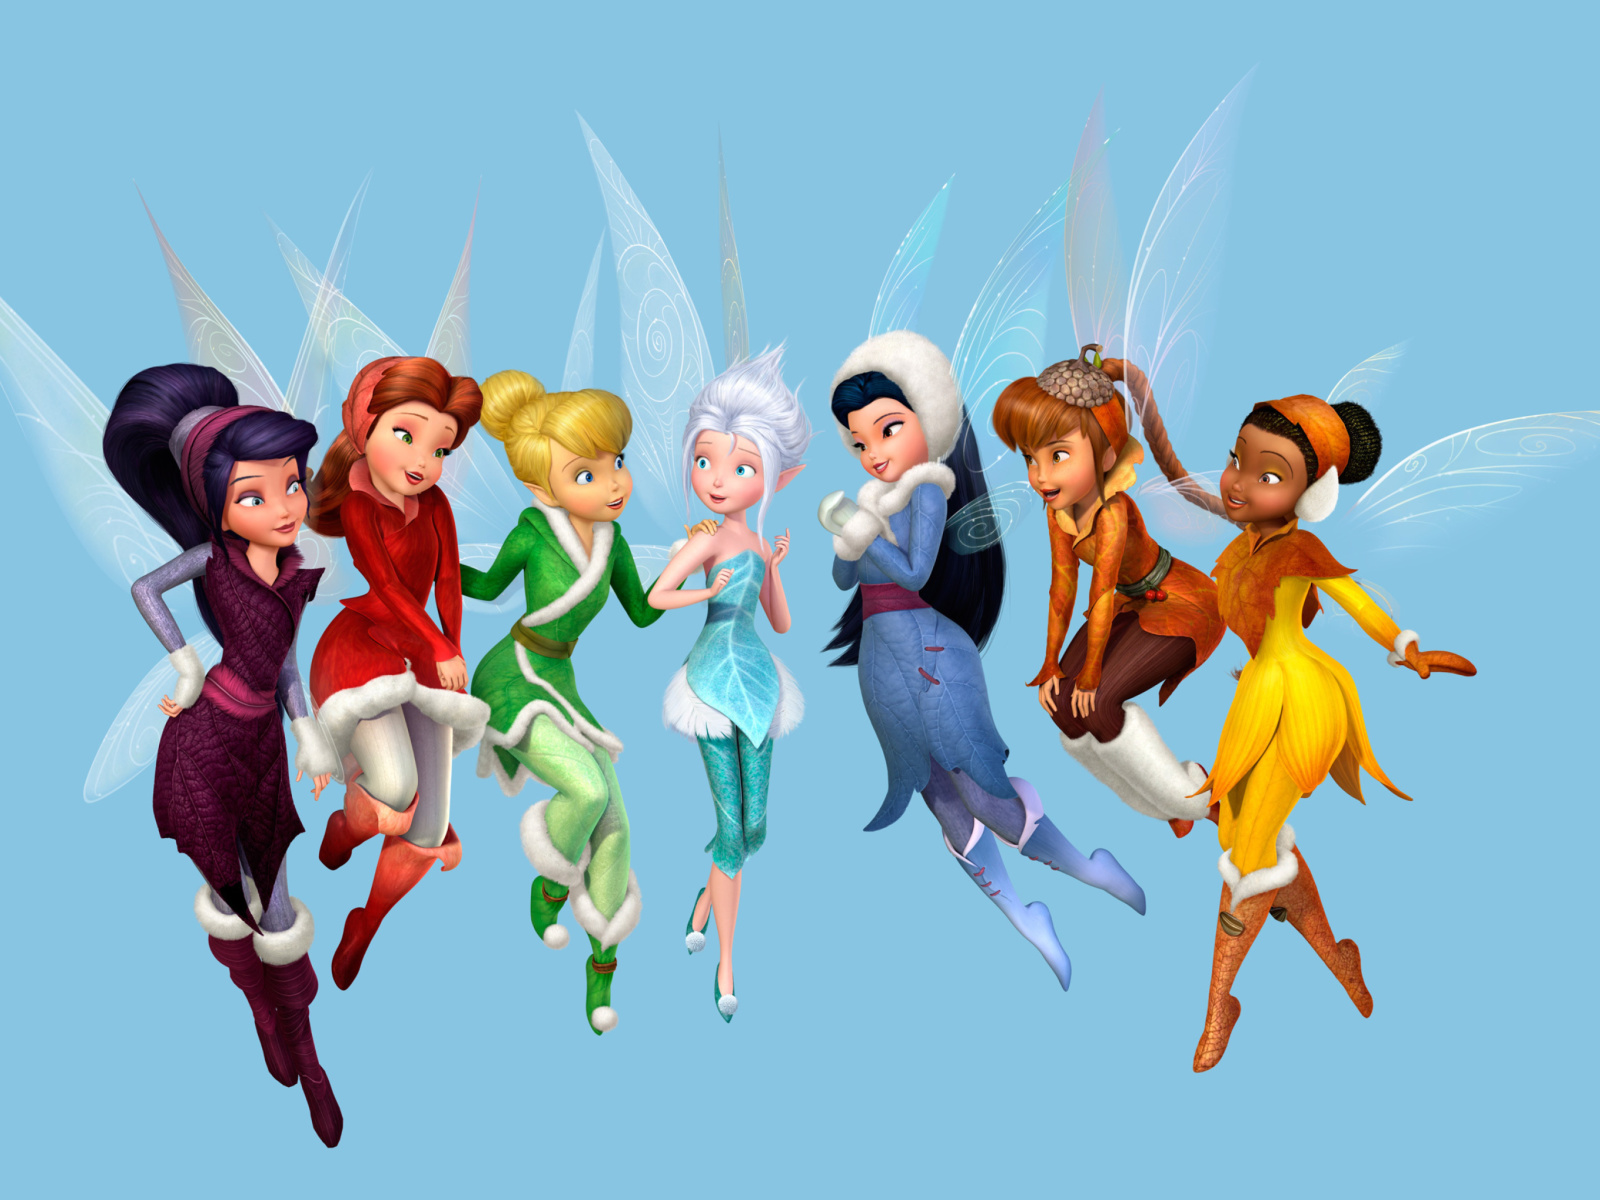 Das Tinkerbell and the Mysterious Winter Woods Wallpaper 1600x1200